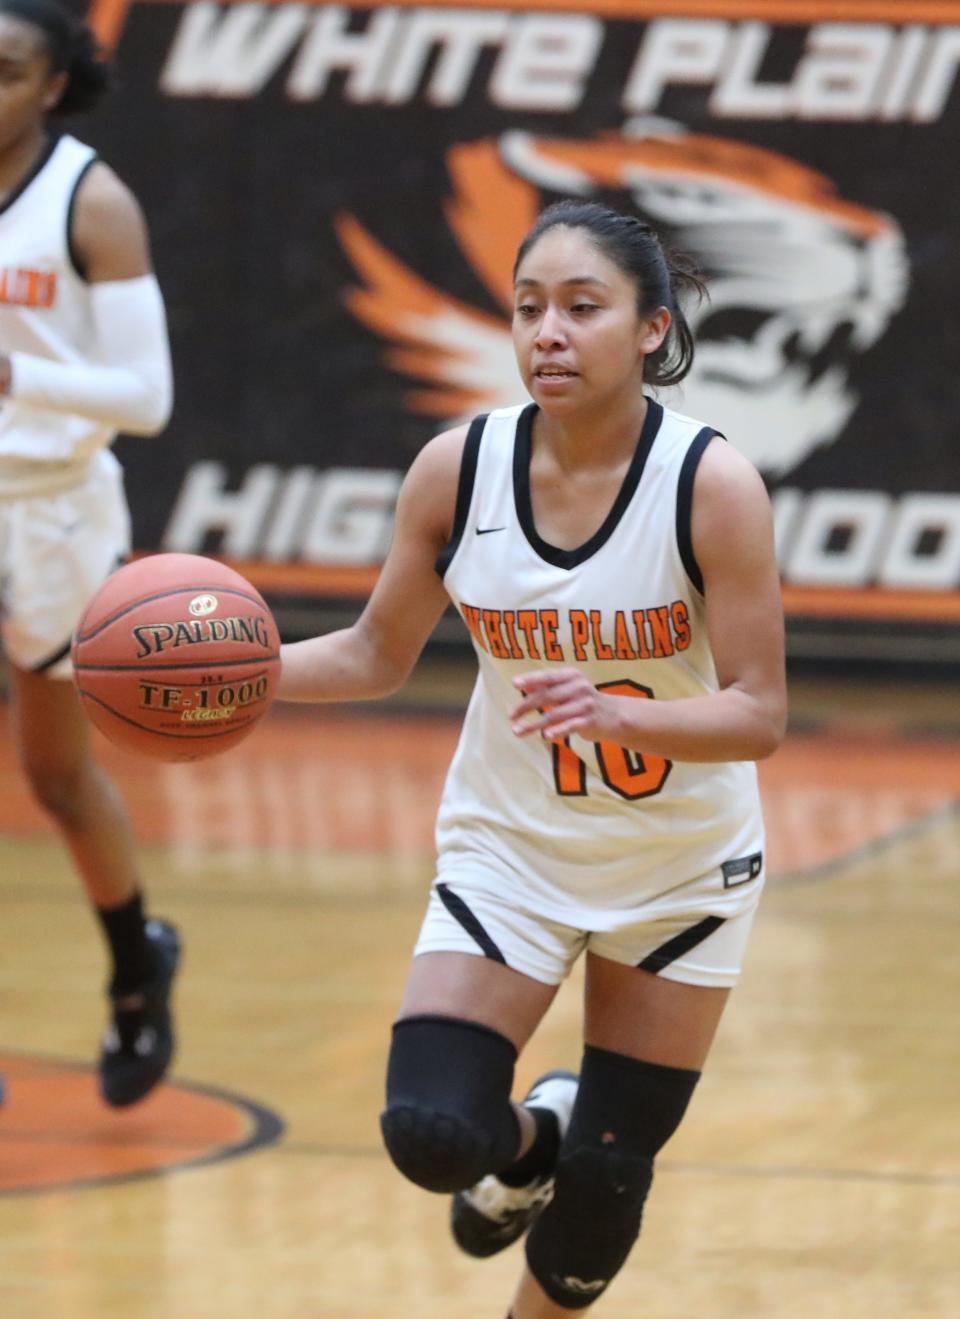 White Plains' Ineivi Plata brings the ball up-court during a Section 1 Class AA quarterfinal at Mamaroneck Feb. 24, 2023. White Plains beat New Rochelle 65-42.